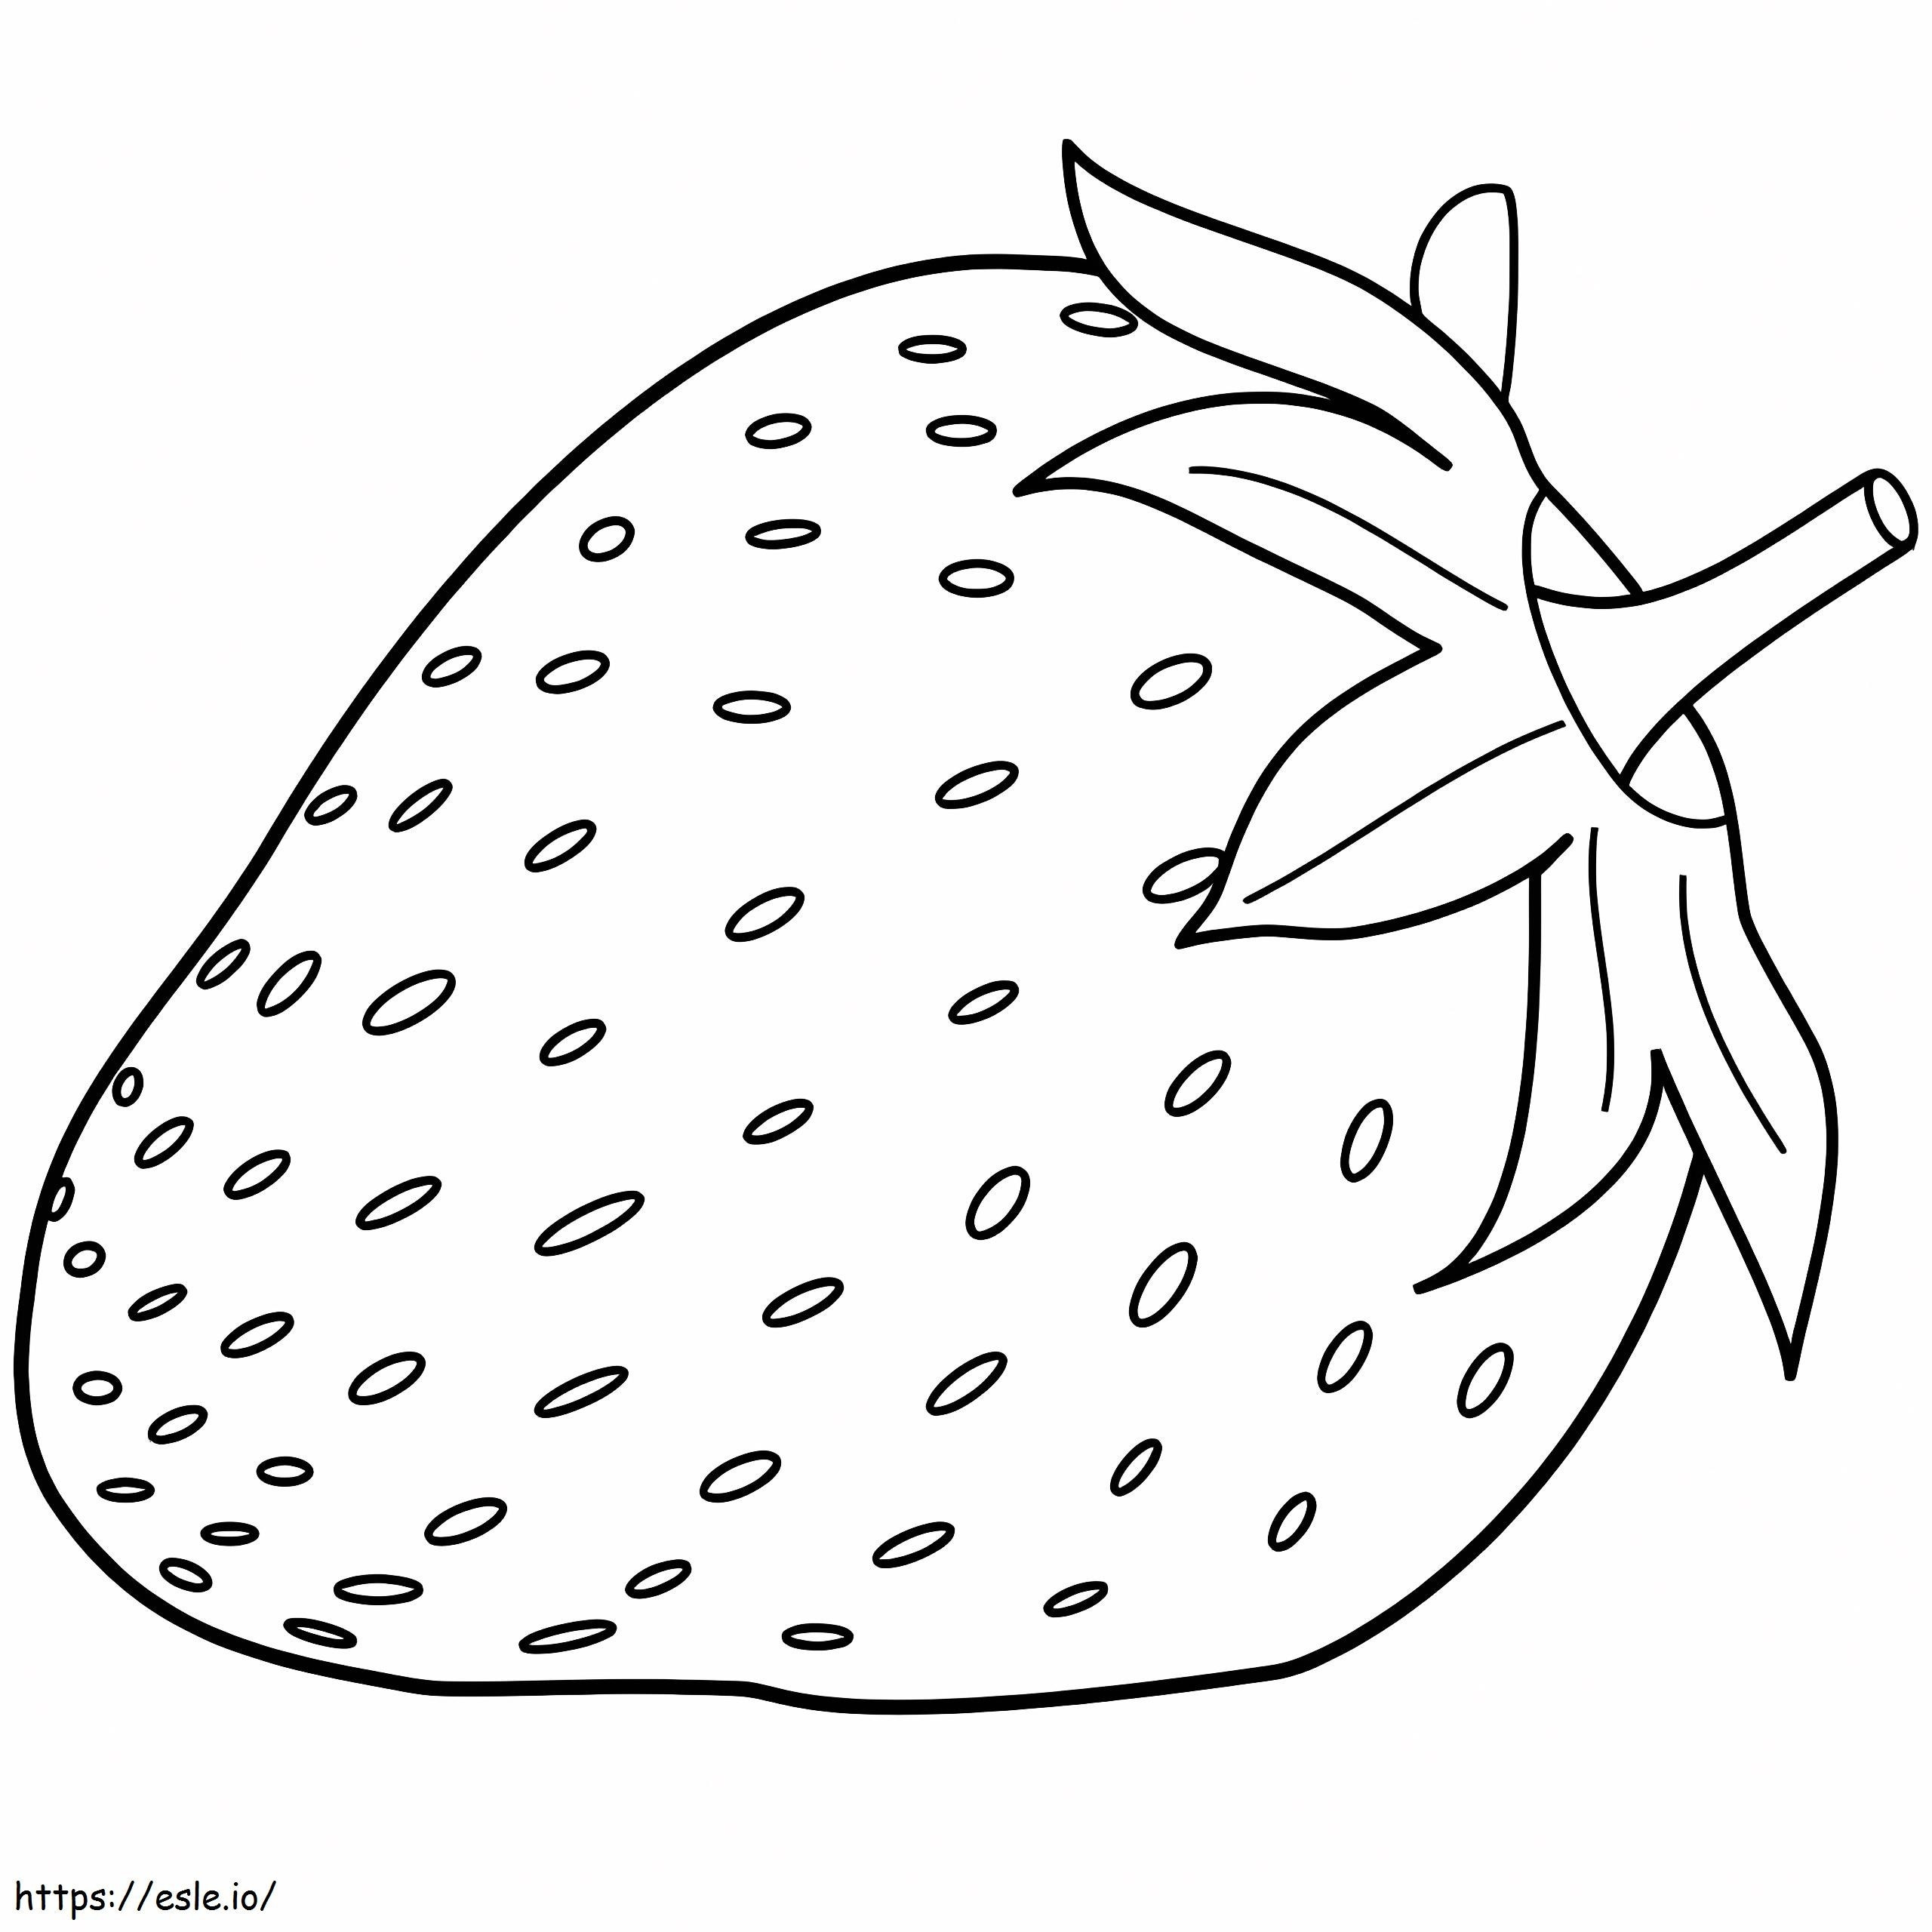 Awesome Strawberry coloring page